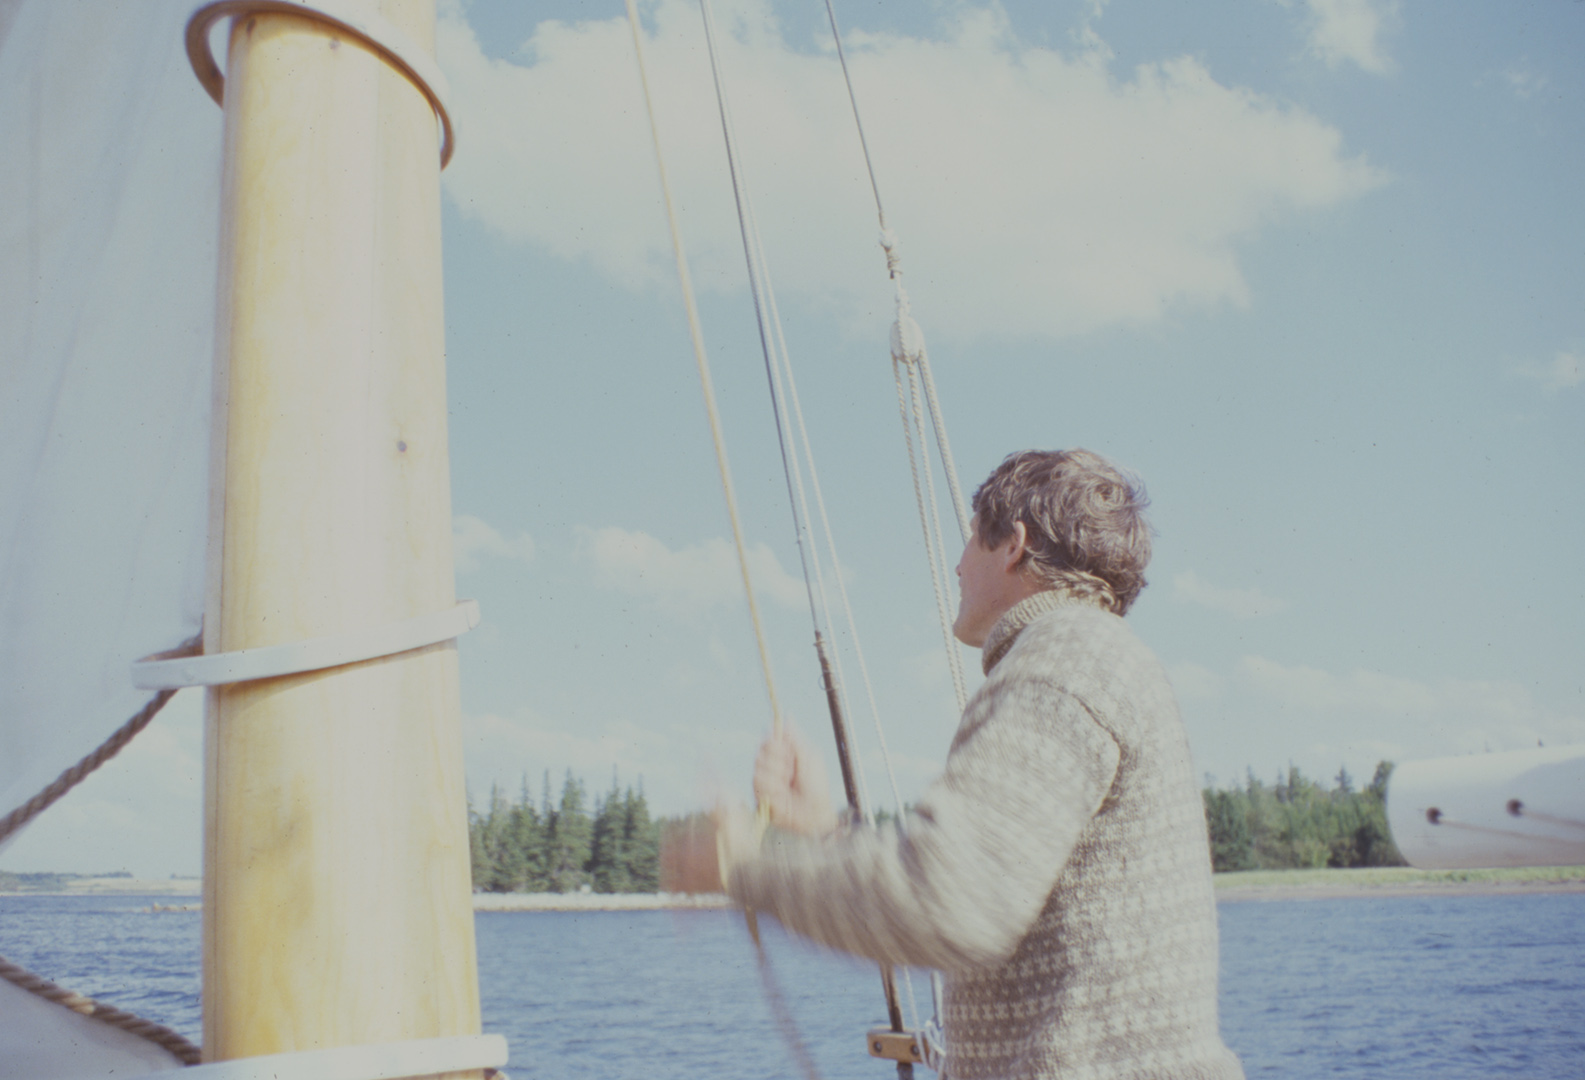  "He owned a sailboat. I loved whenever I got the chance to go on it." 